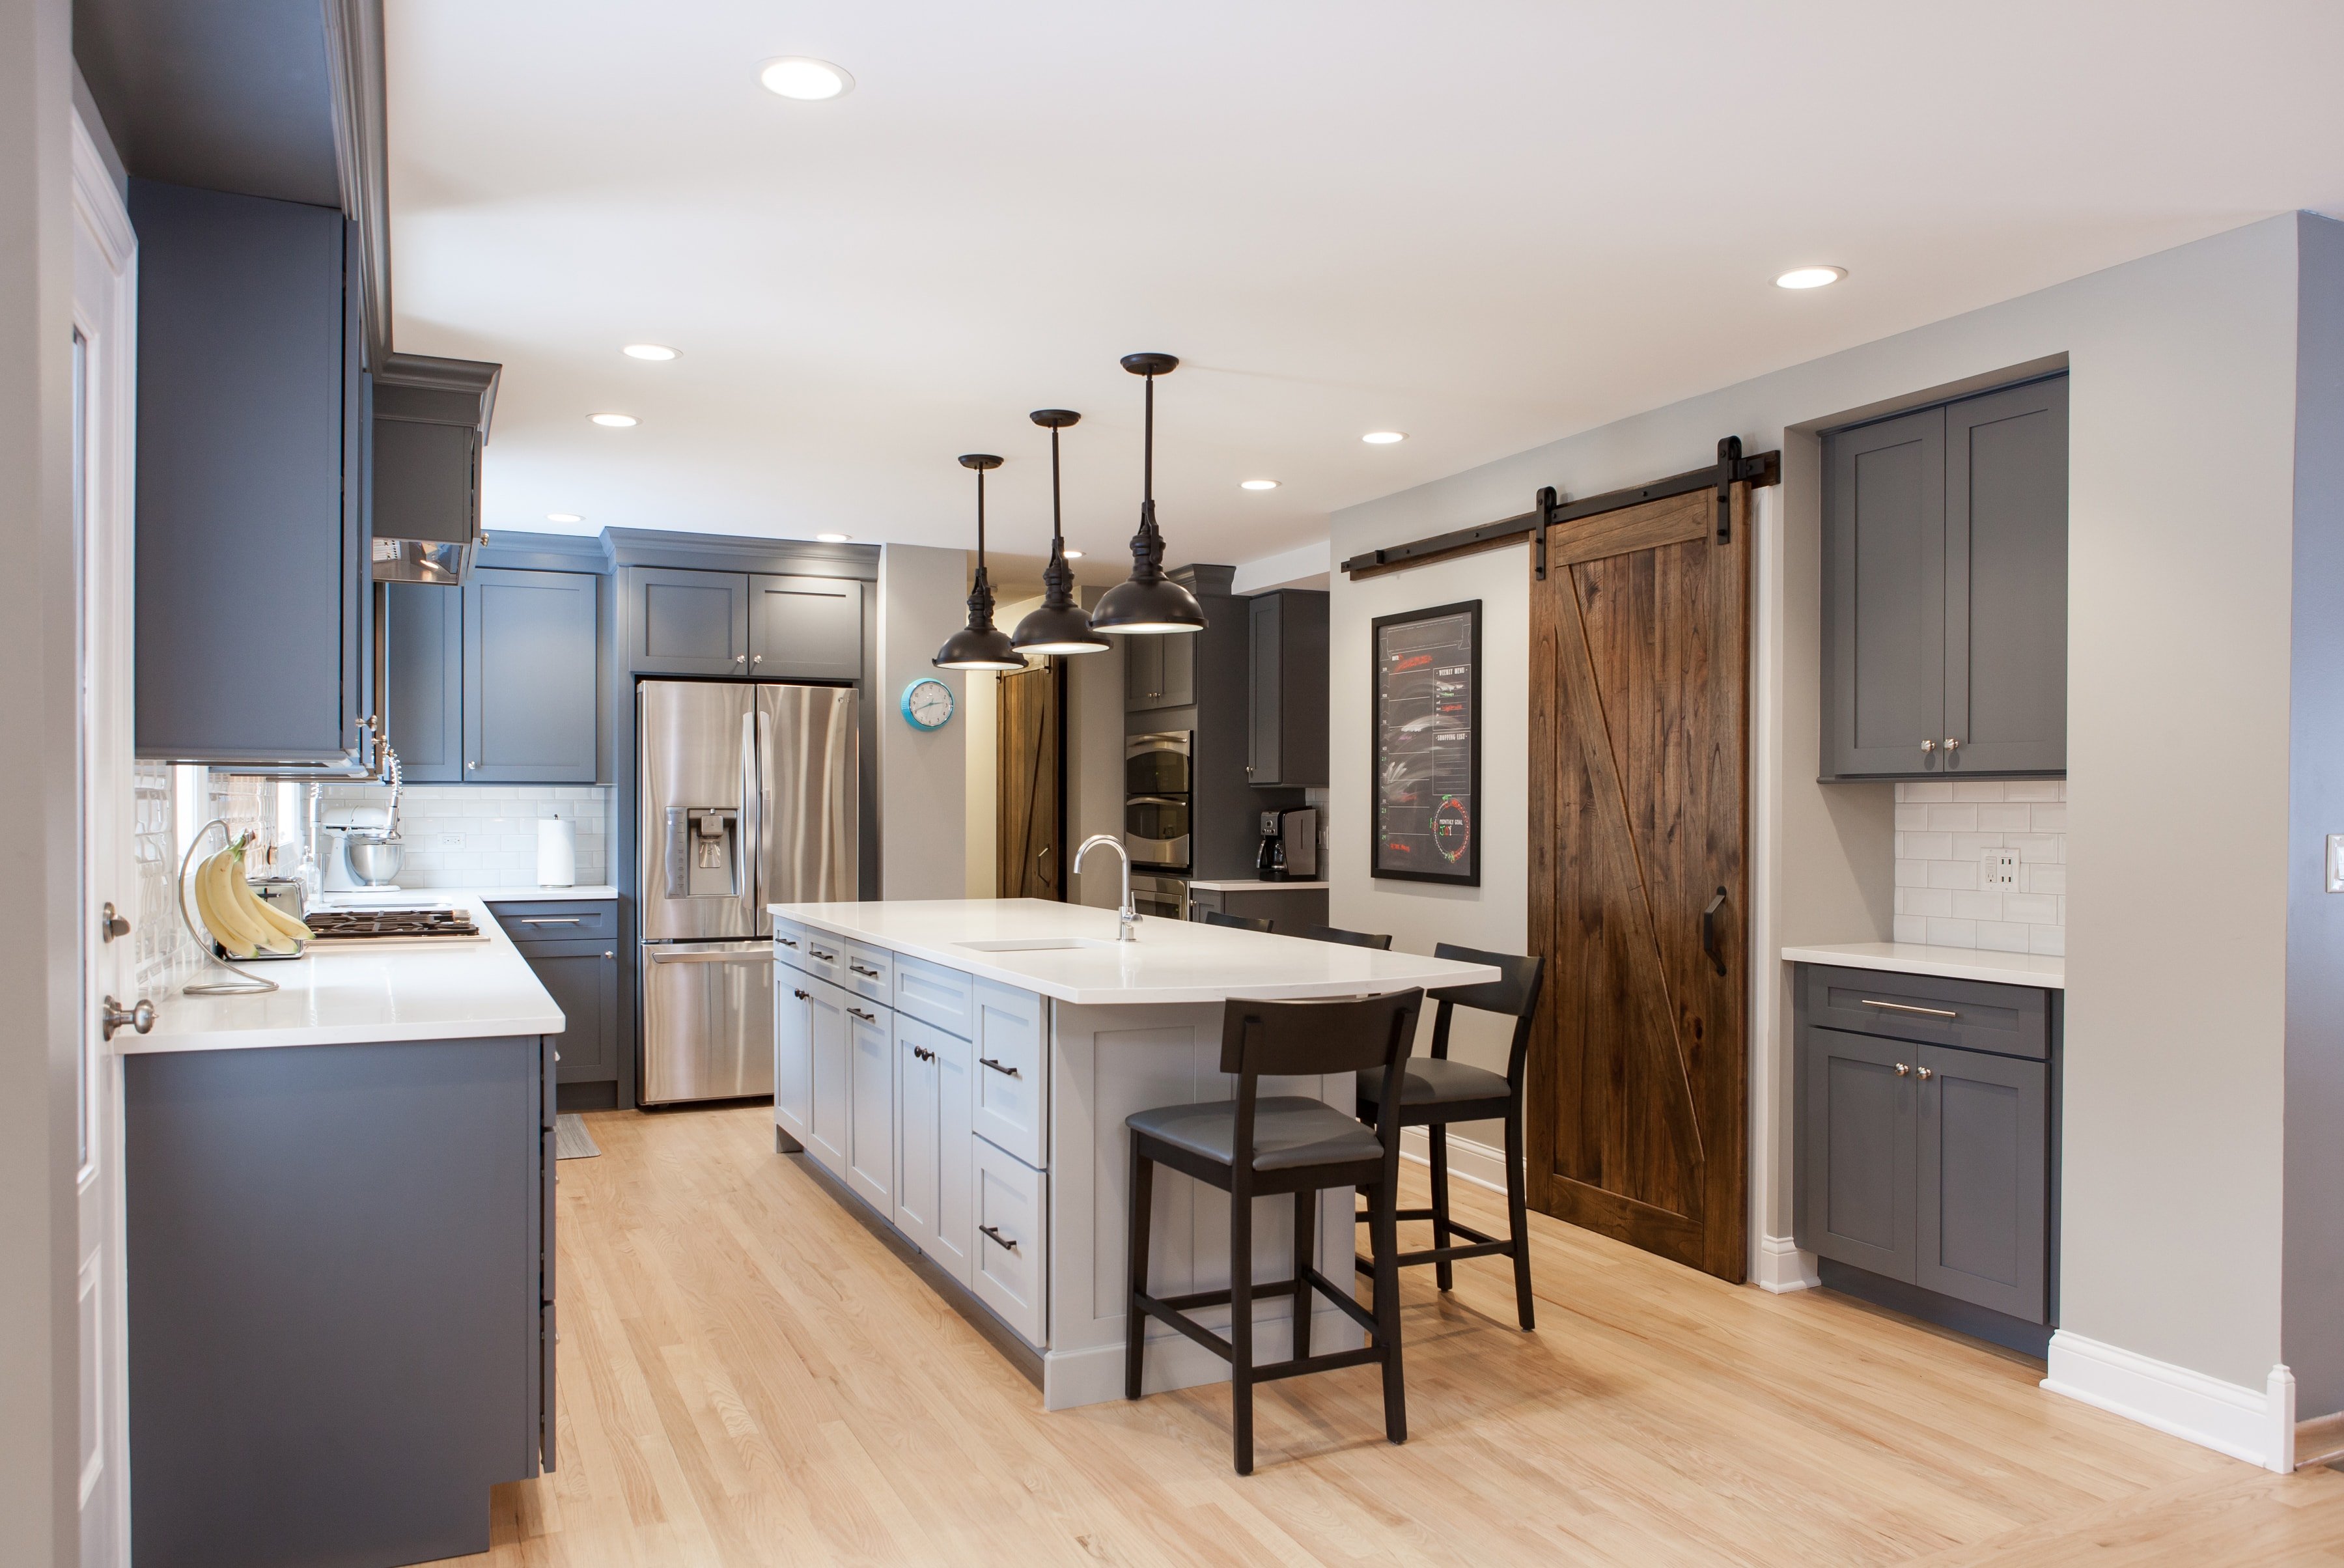 Kitchen Remodel Cost In Chicago, How Much Does It Cost To Remodel A Kitchen